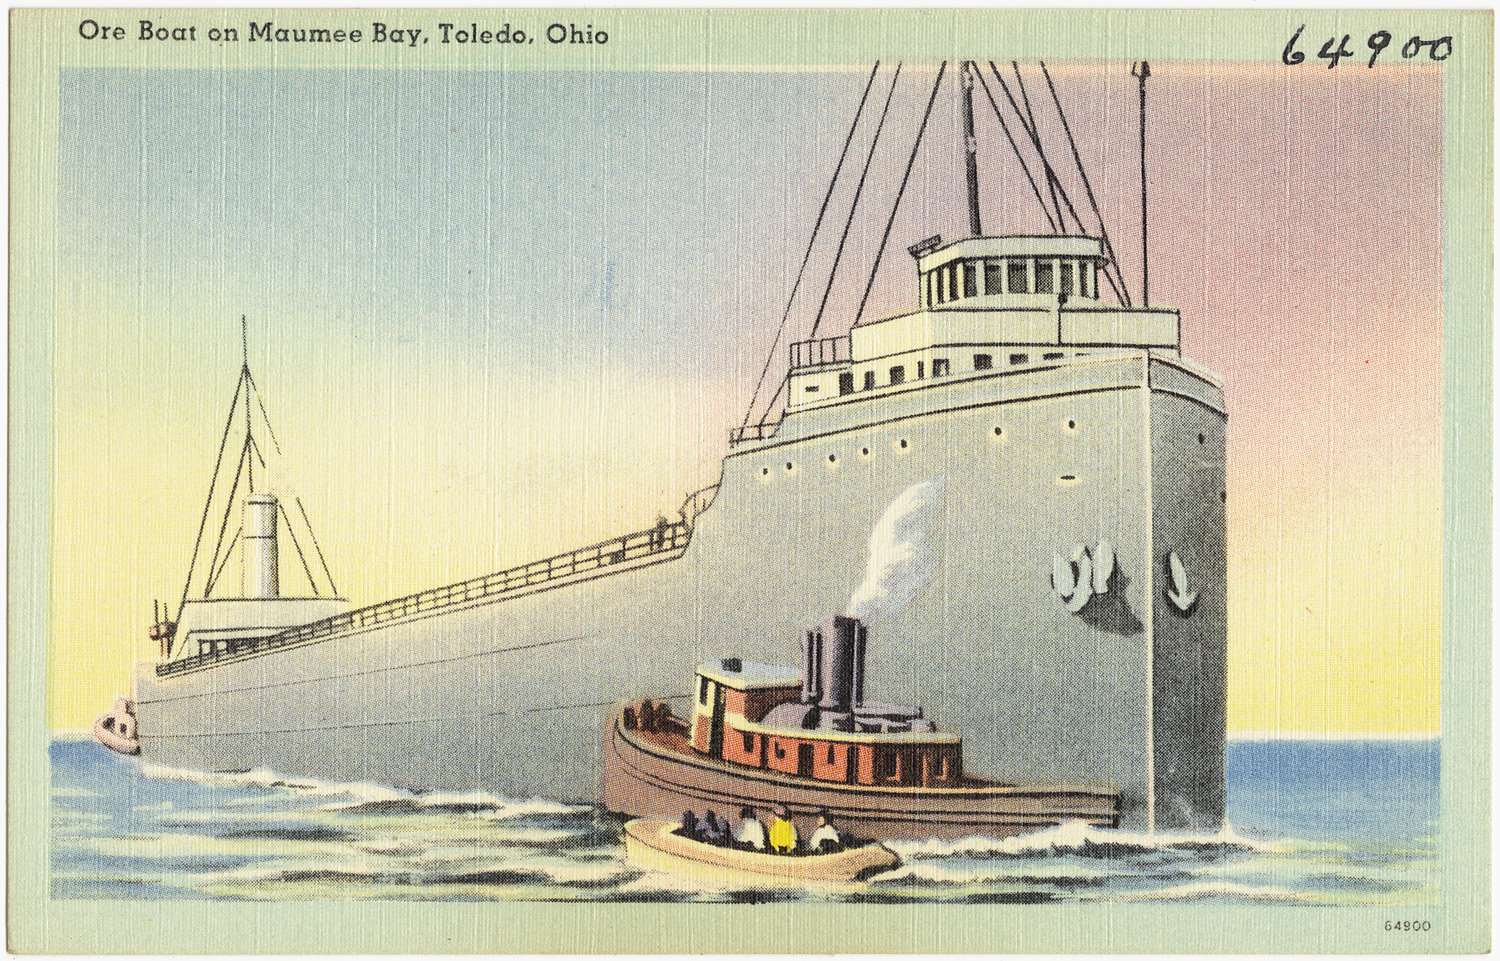 there is a postcard depicting a tugboat towing a huge ship